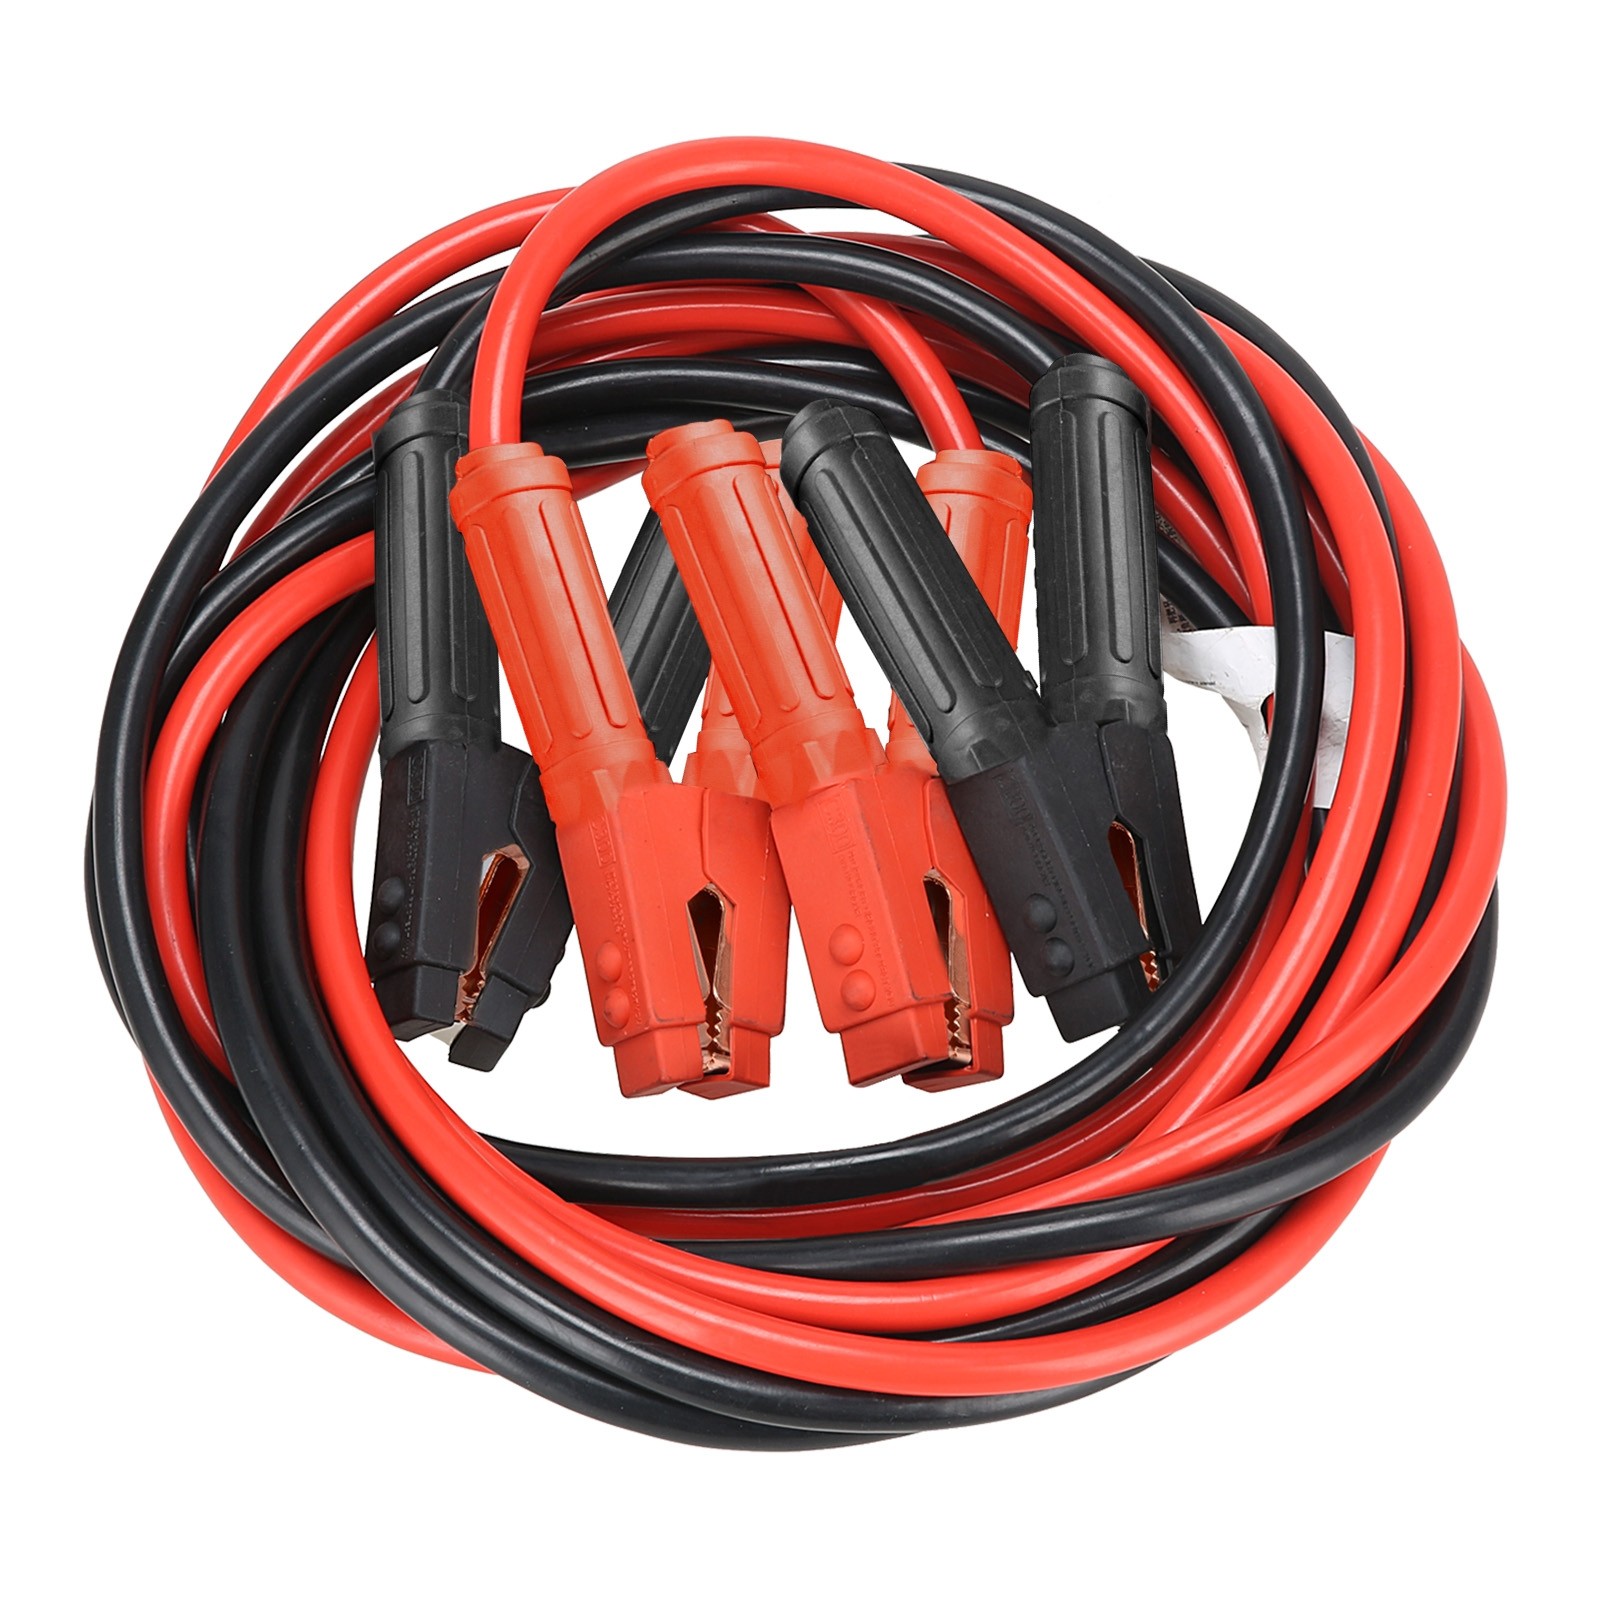 1200 AMP Heavy Duty Commercial Booster Jump Leads Starter Leads Cars Hgvs TE599 